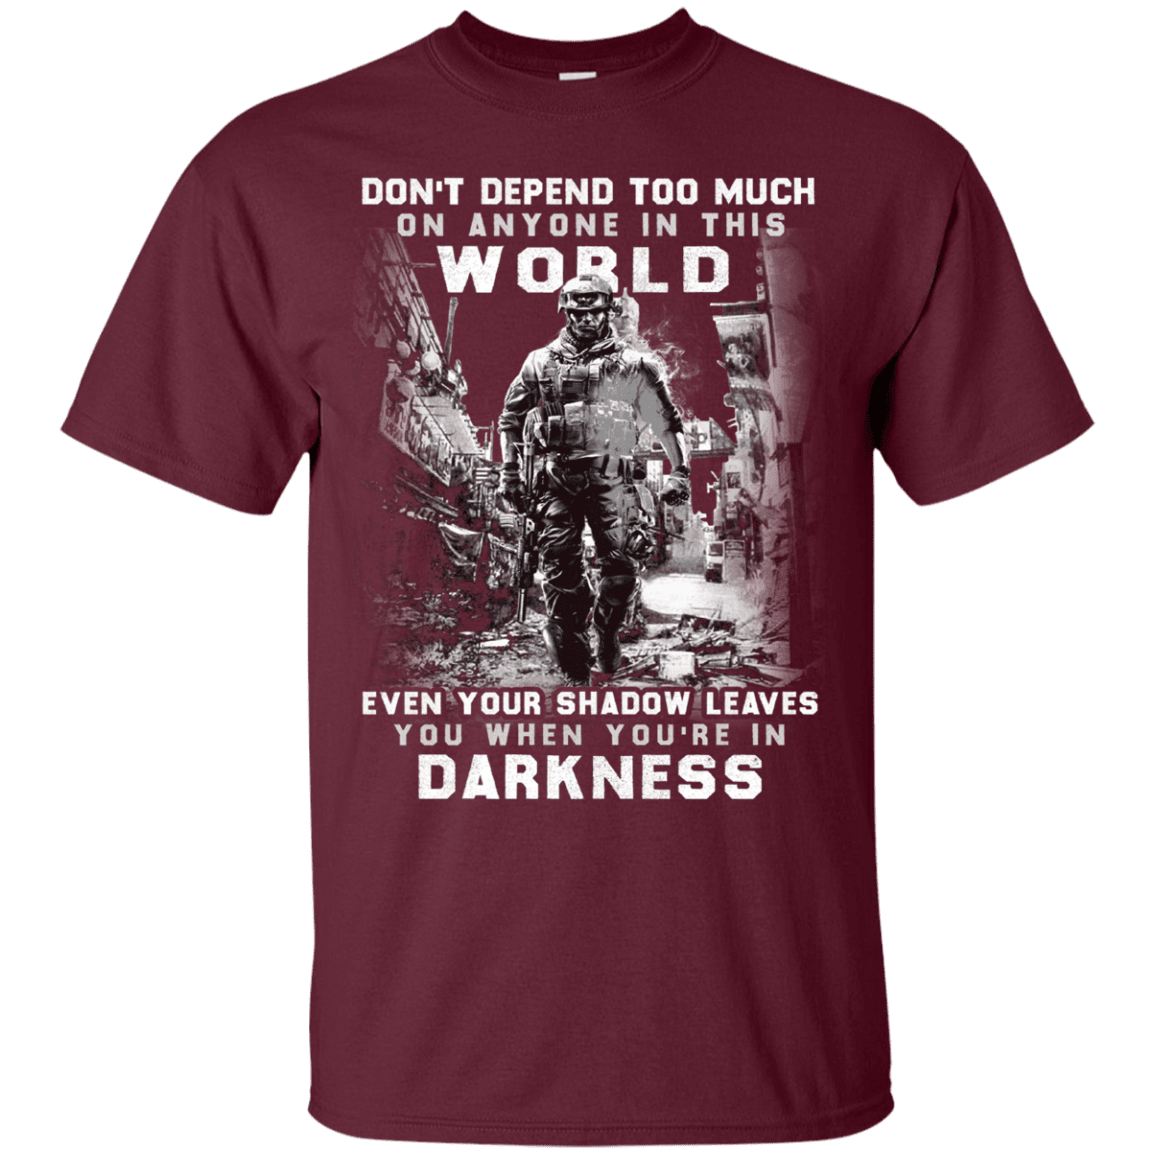 Military T-Shirt "DON'T DEFEND TOO MUCH ANYONE IN THIS WORLD"-TShirt-General-Veterans Nation